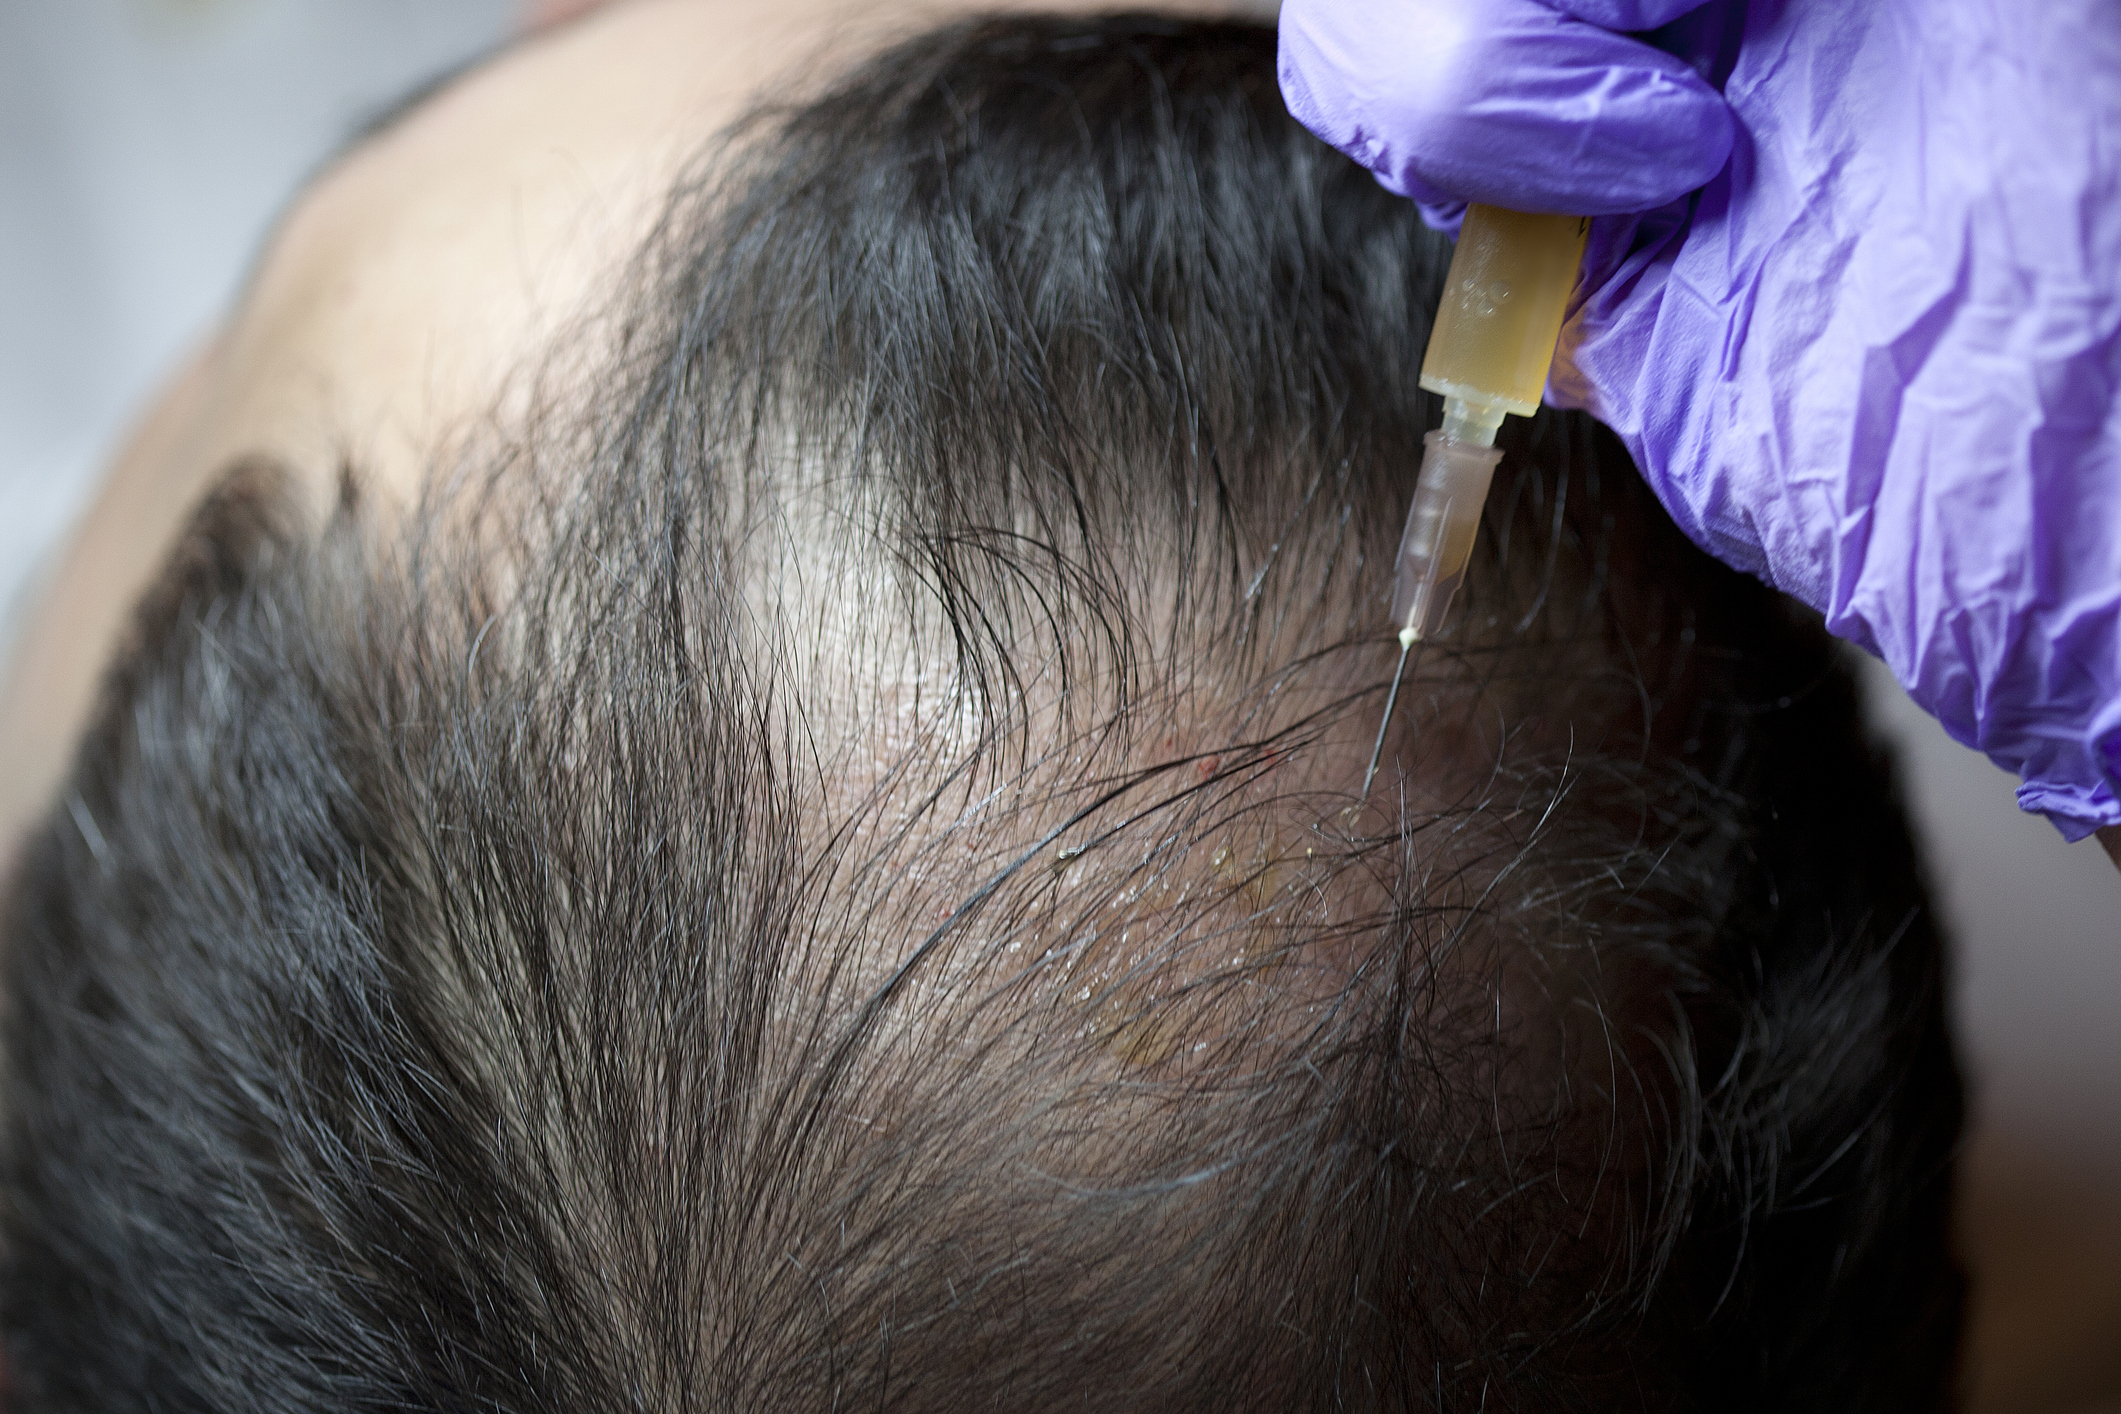 Things to beware of before undergoing hair restoration processes